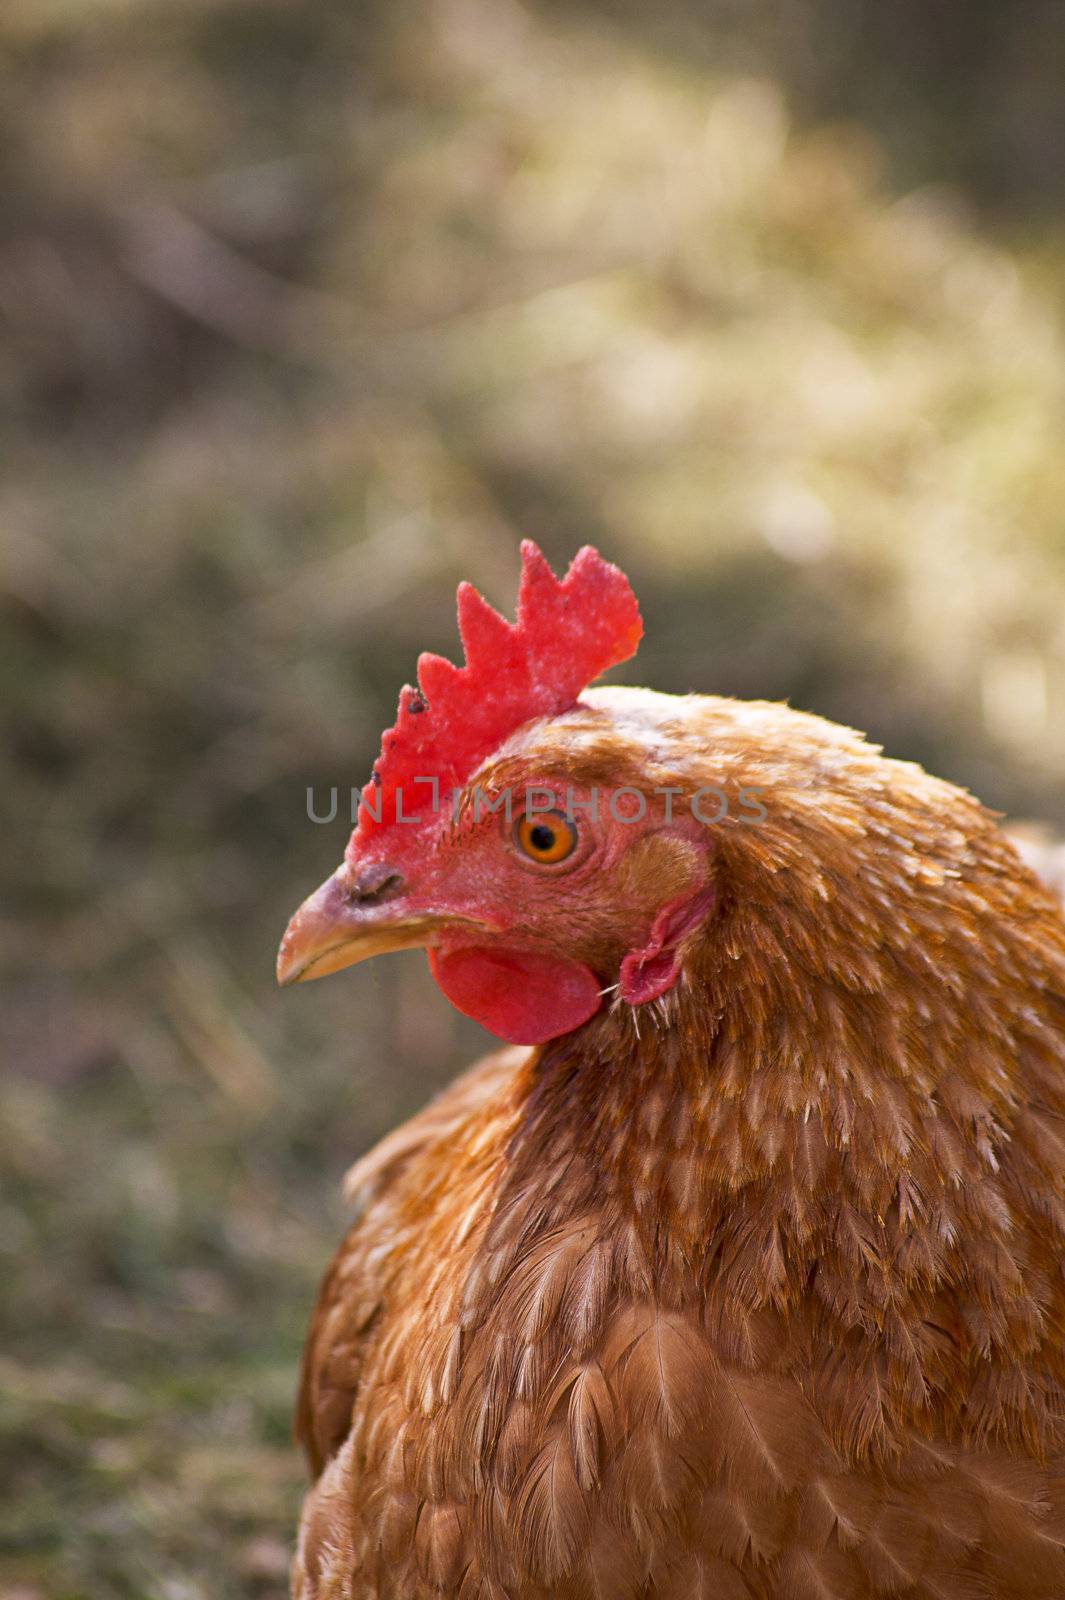 Close up of a single female brown feathered chicken.